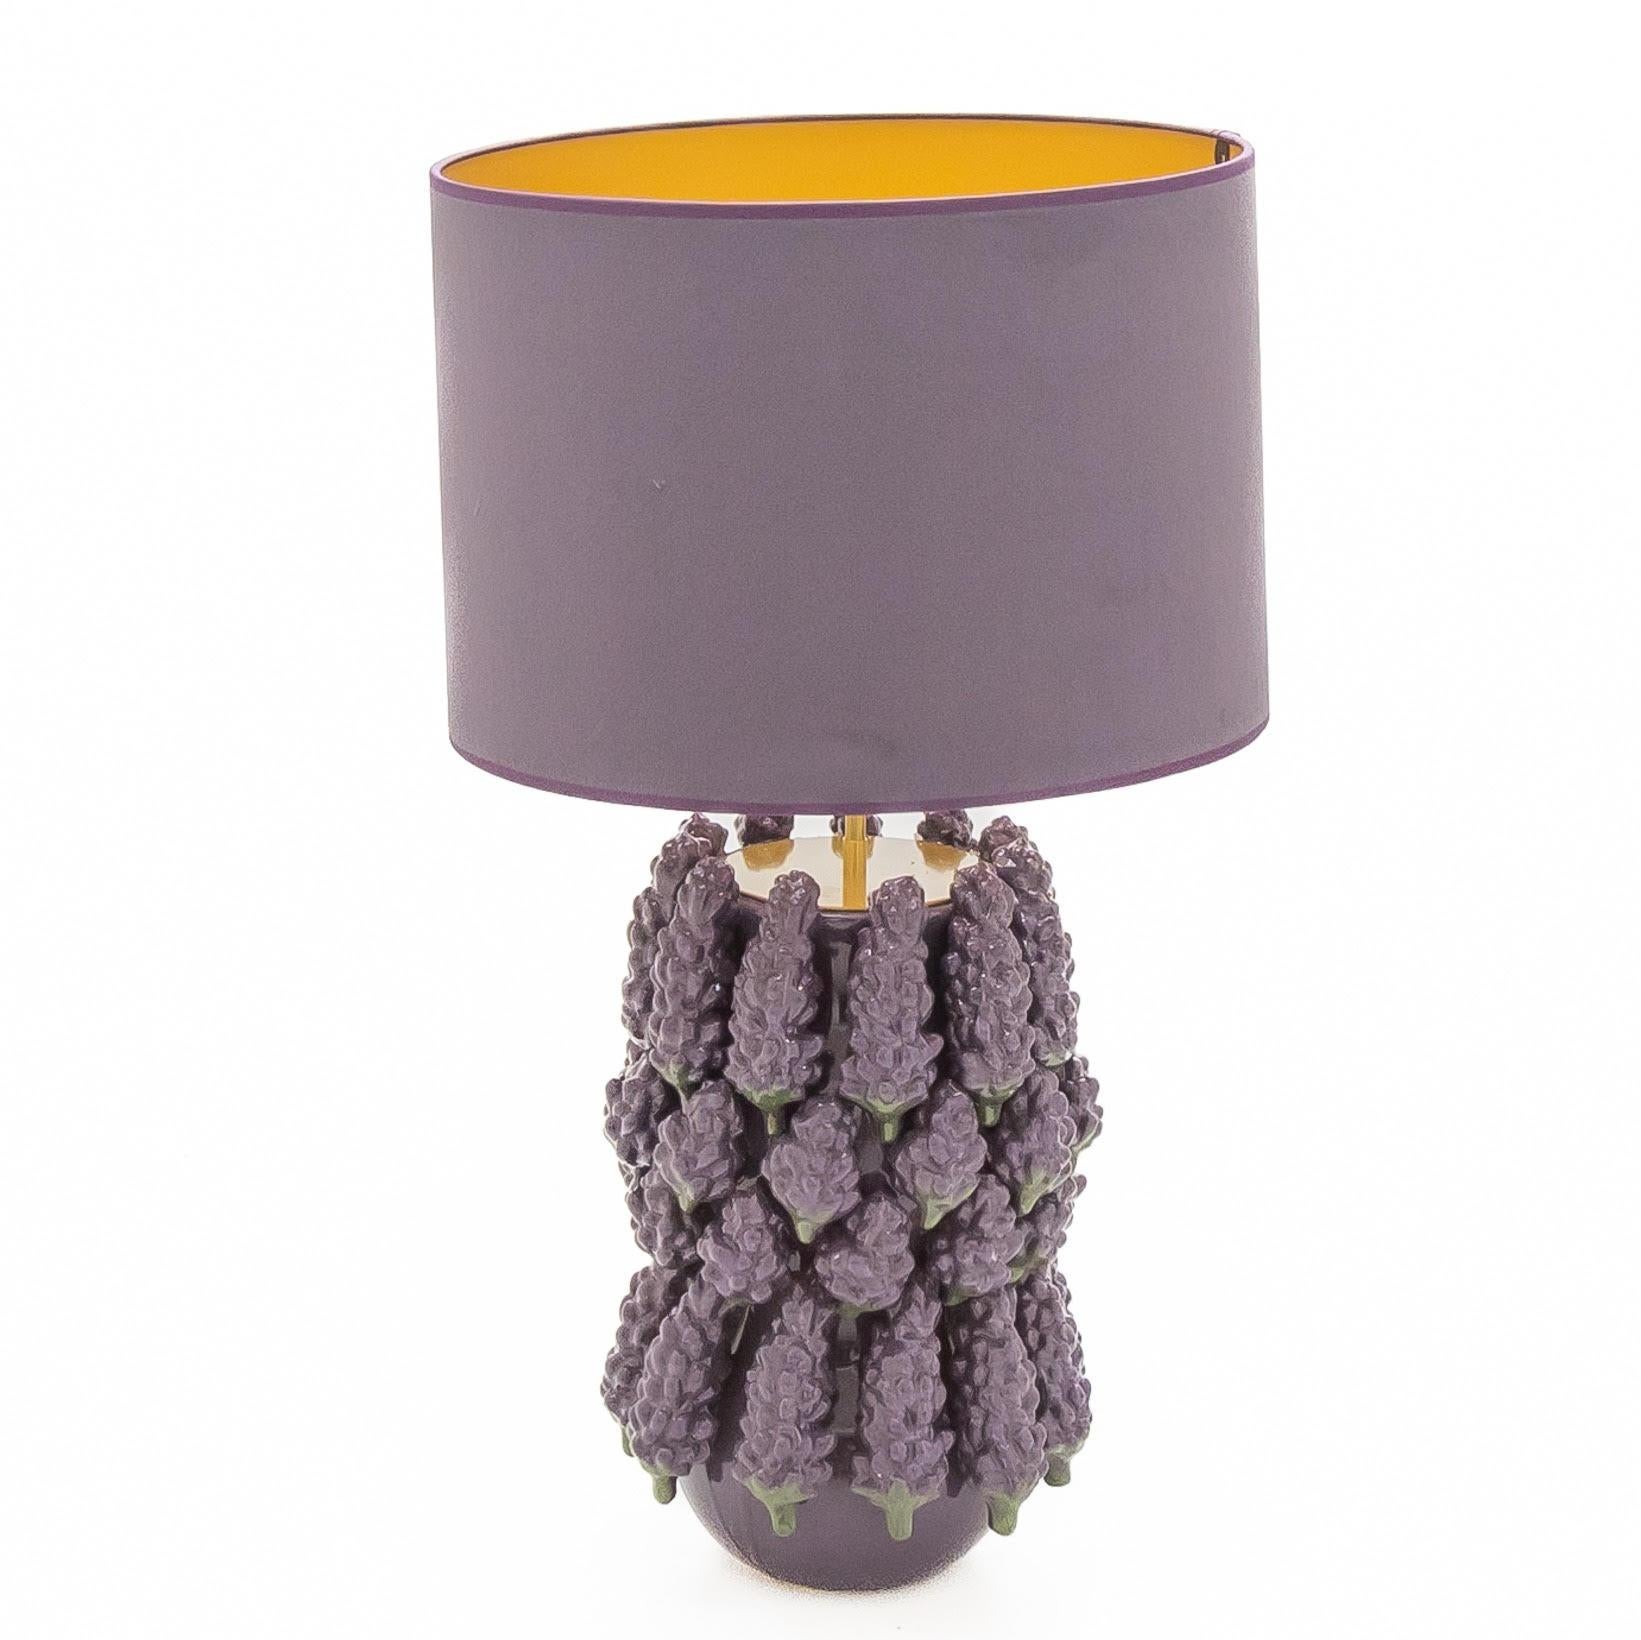 Pair of Lavender Ceramic Table Lamps
Original pair of ceramic table lamps in the shape of lavender, handmade. Matching purple velvet shade included.
Dimensions - H: 71 cm, d: 35 cm
Production time 1-3 weeks